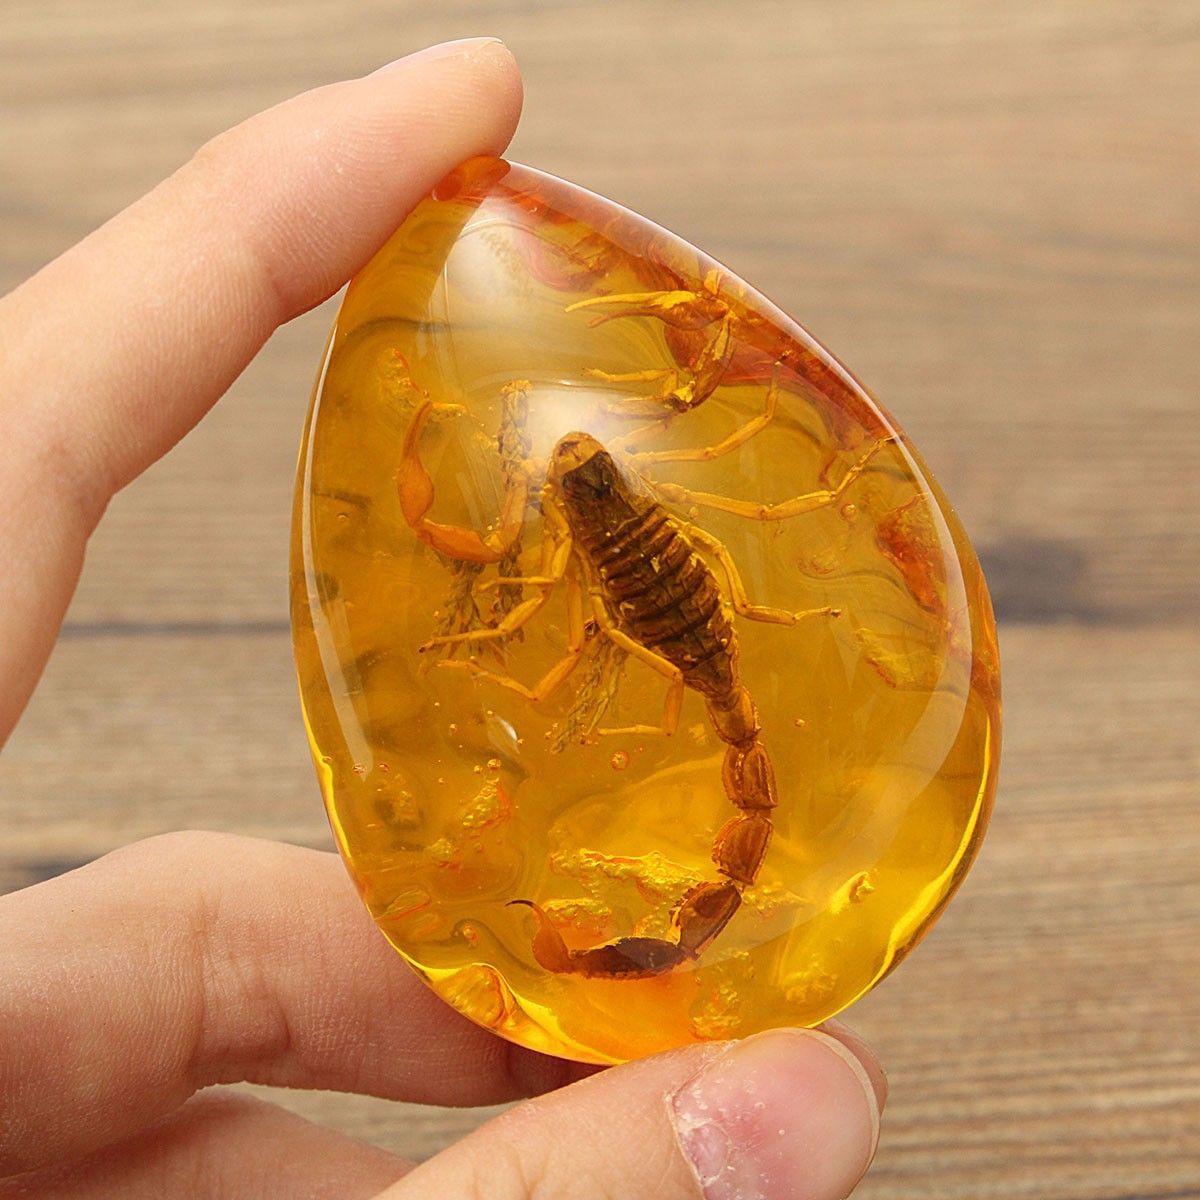 Insect-Stone-Scorpions-Inclusion-Amber-Baltic-Pendant-Necklace-Decorations-1476904